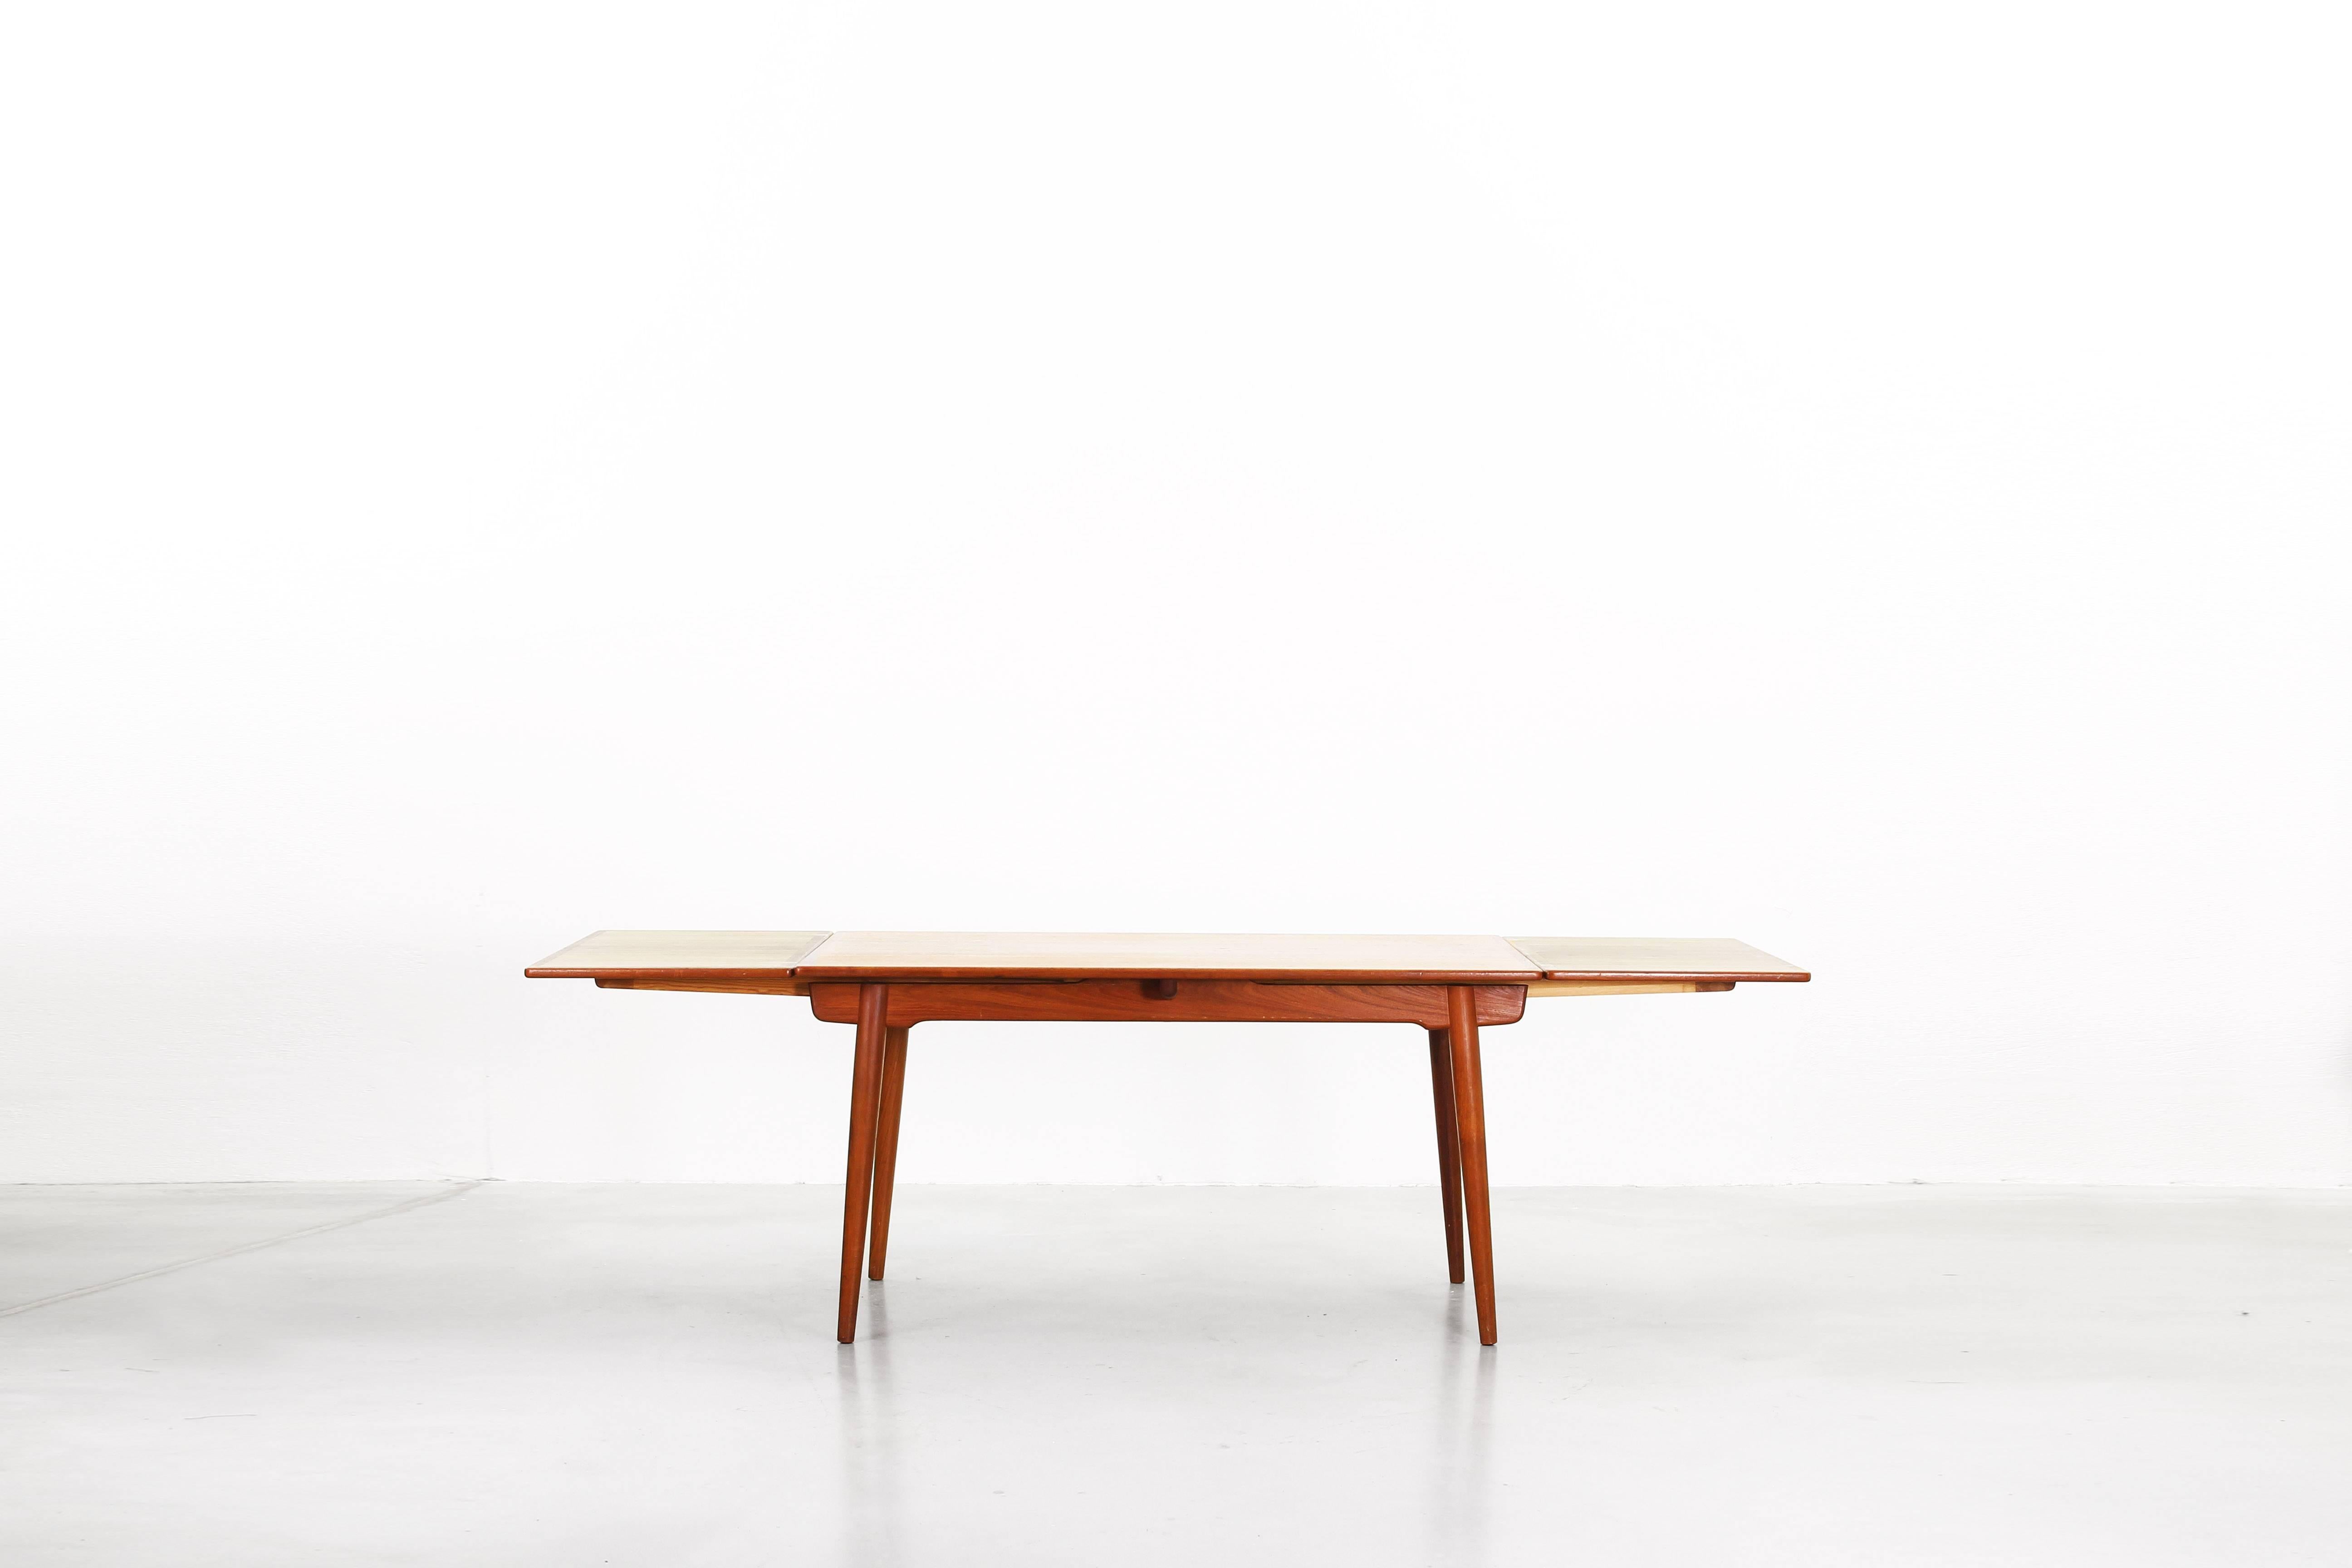 Very beautiful dining table mod. 312 designed by Hans J. Wegner and produced by Andreas Tuck in the 1950s.
This table comes with two extensions (L 140 cm + 2 x 50 cm x W 90 cm x 72 cm), is in a very good condition and is made of teak.